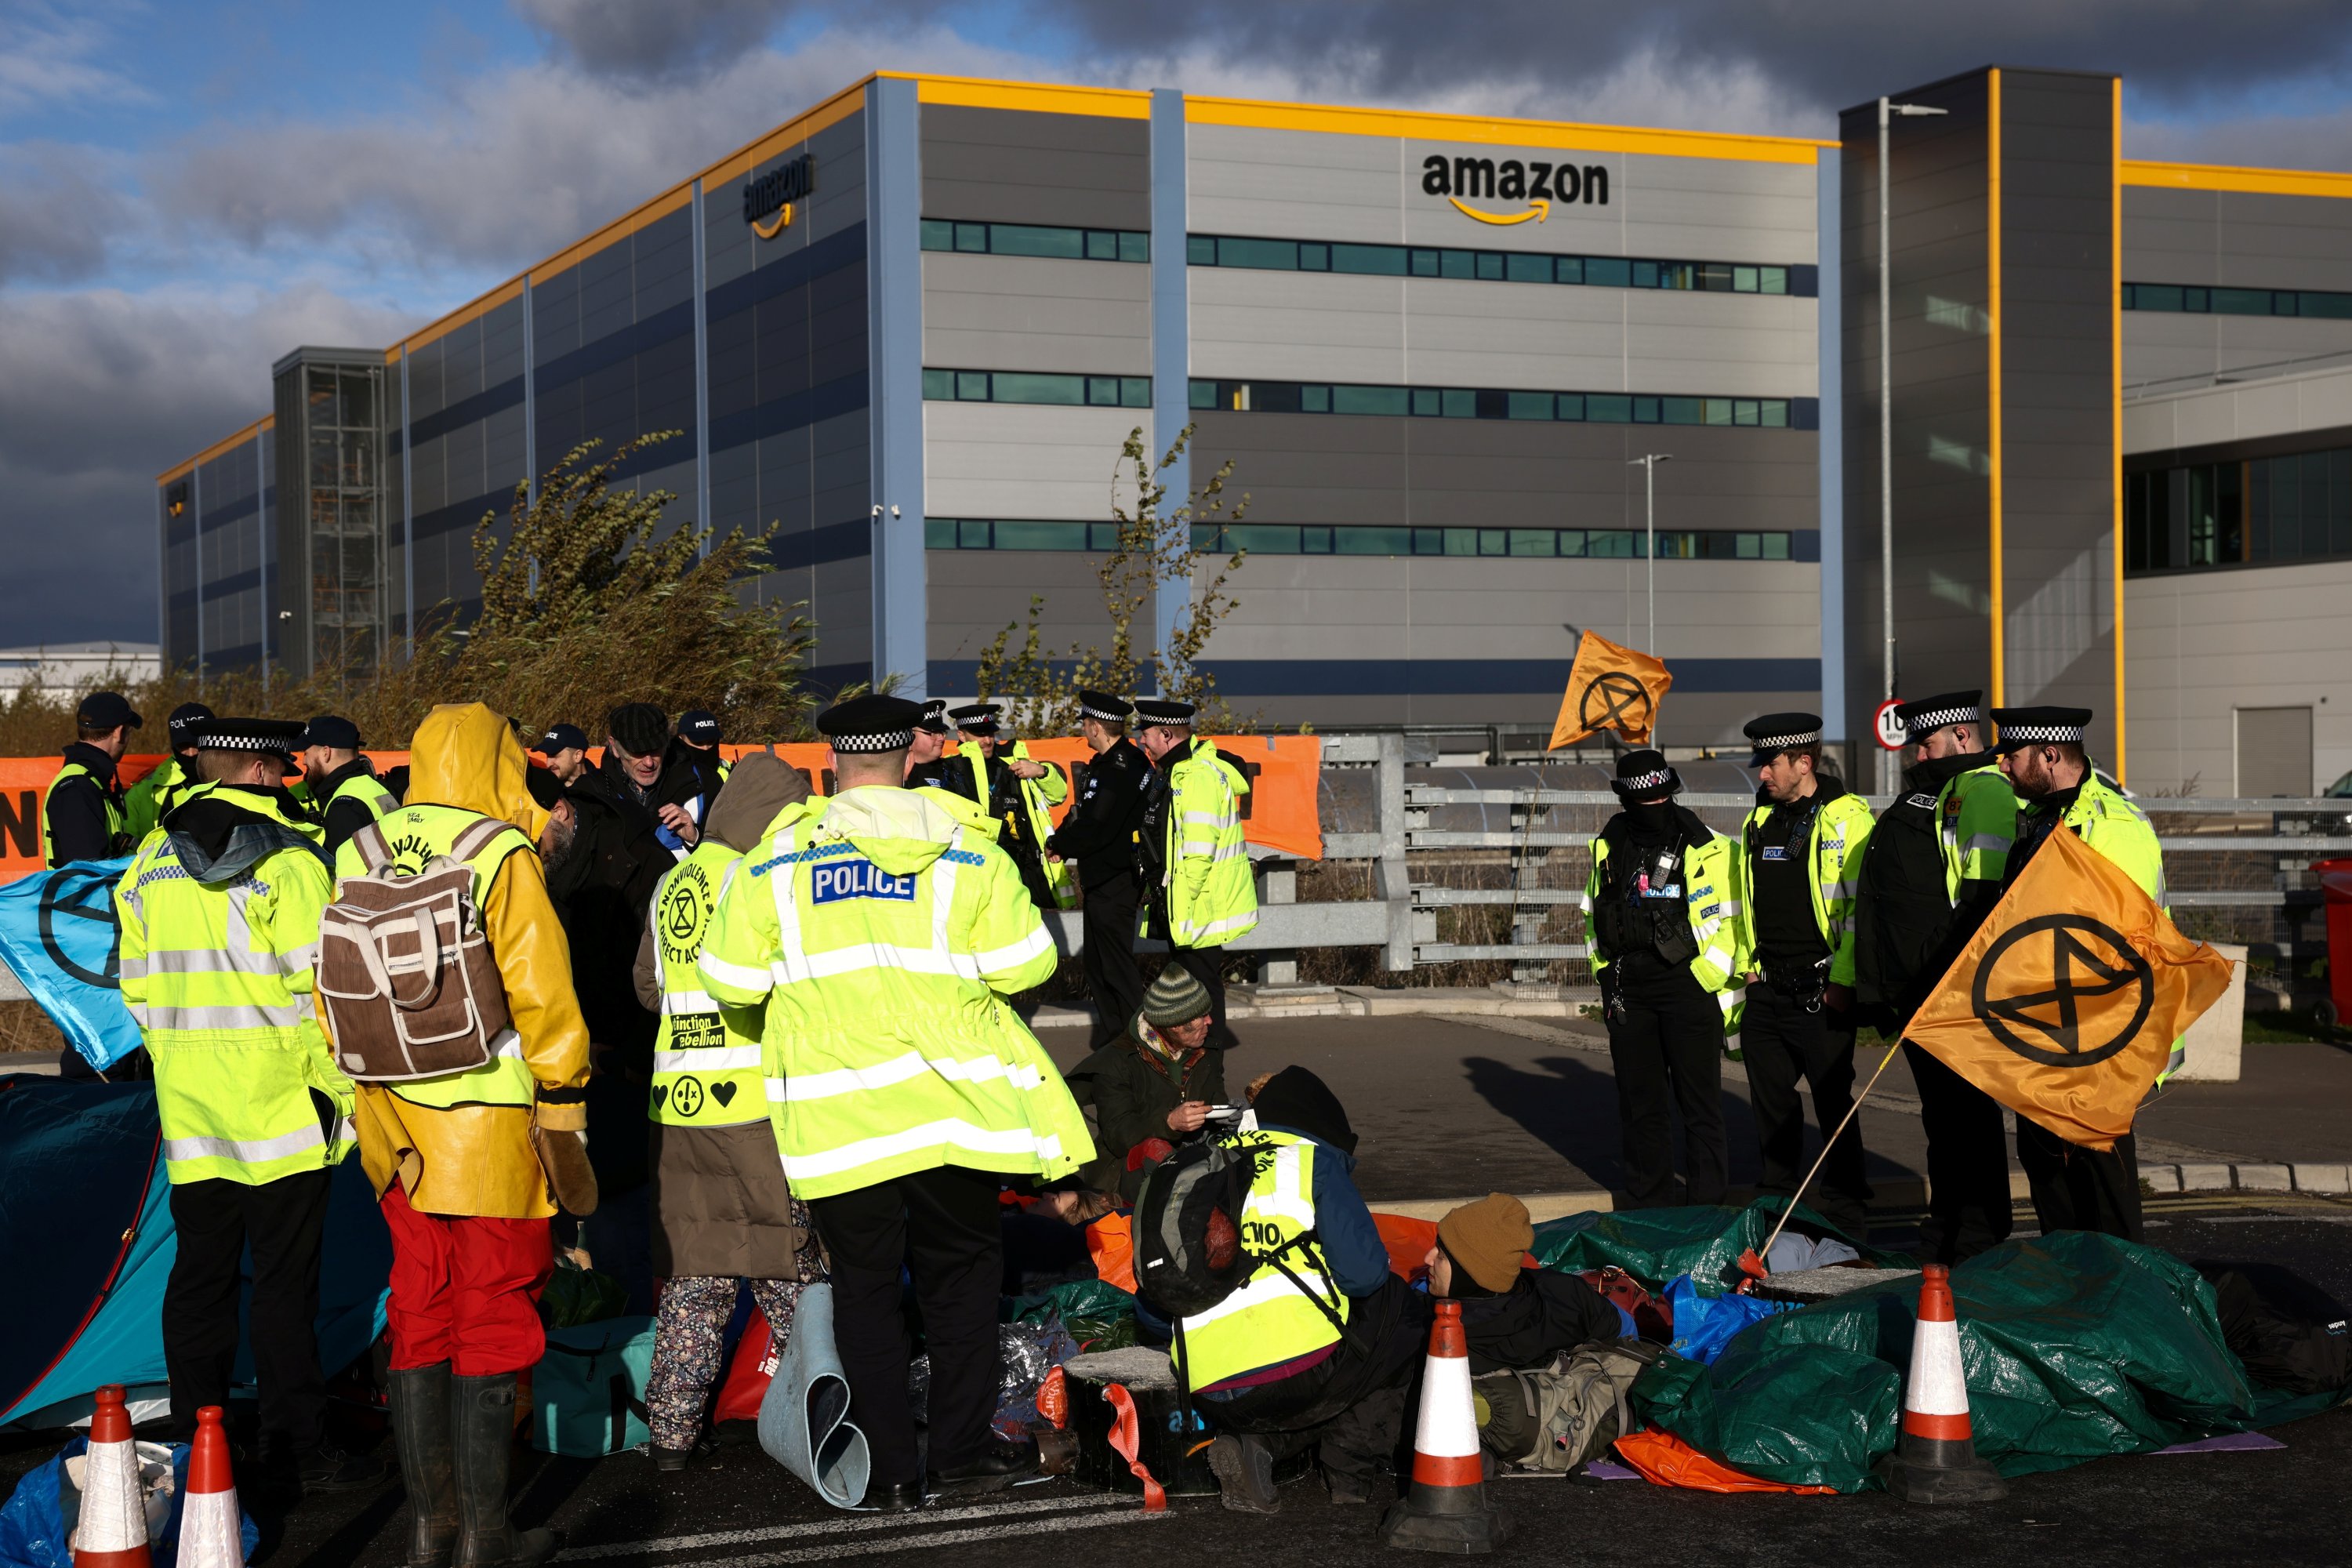 Police officers speak with protesters, as Extinction Rebellion activists block a street outside an Amazon fulfilment centre in Tilbury, Essex, Britain, Nov. 26, 2021. (Reuters Photo)